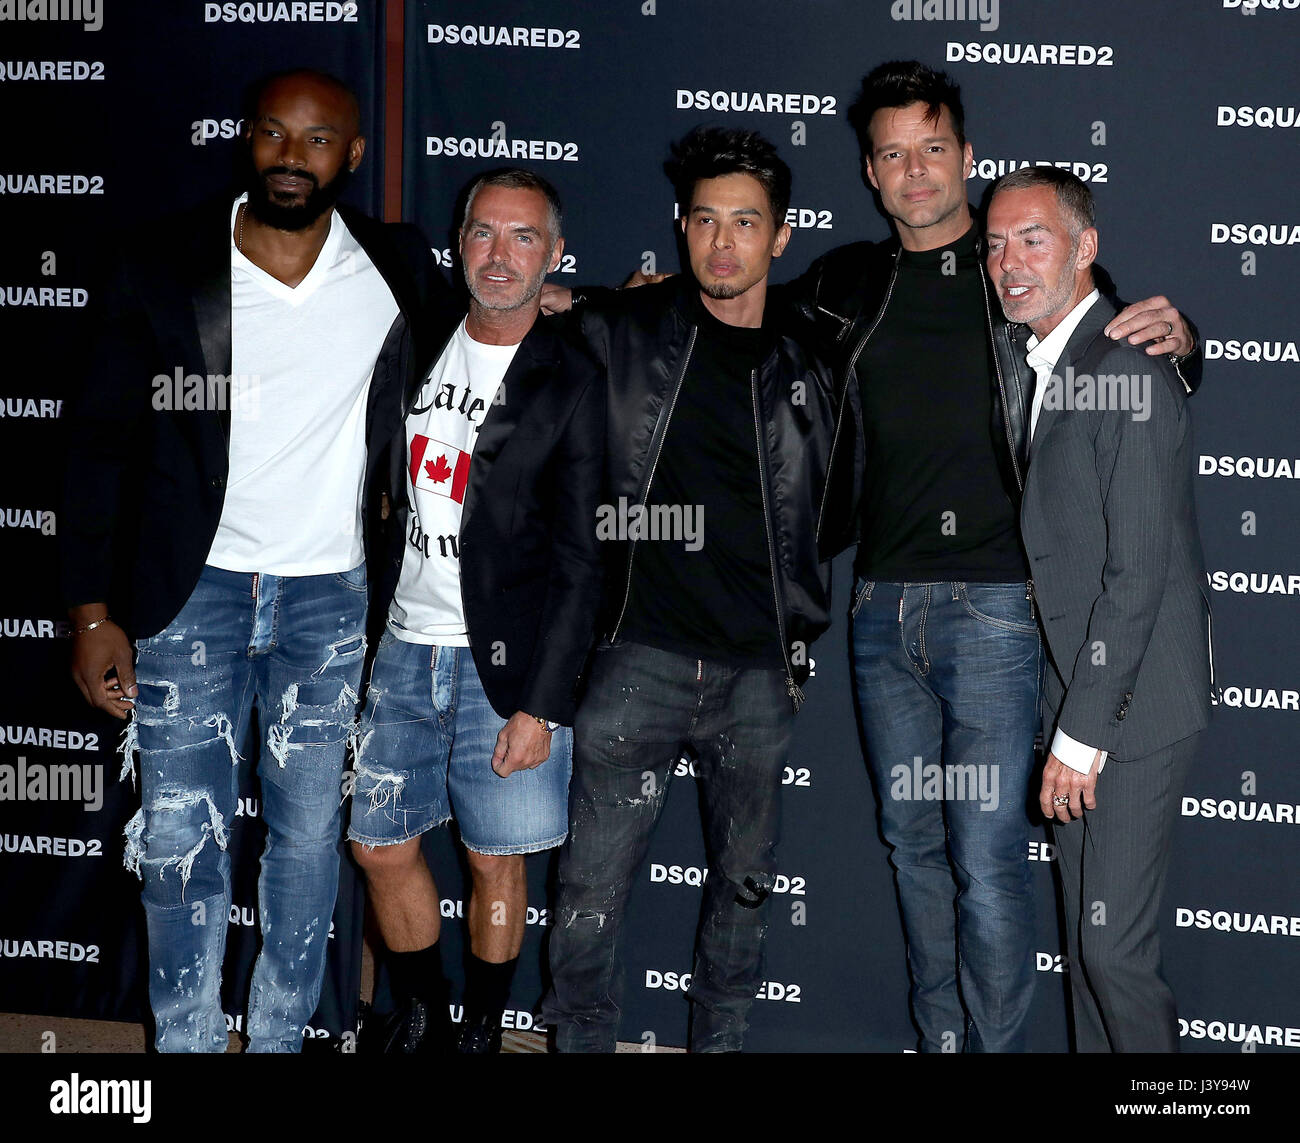 Ricky Martin and Celebrity Designers Dean & Dan Caten Host DSQUARED2 Grand  Opening Party, April 6 at The Shops at Crystals Inside Aria Featuring:  Tyson Beckford, Dean & Dan Caten, Jamie King,